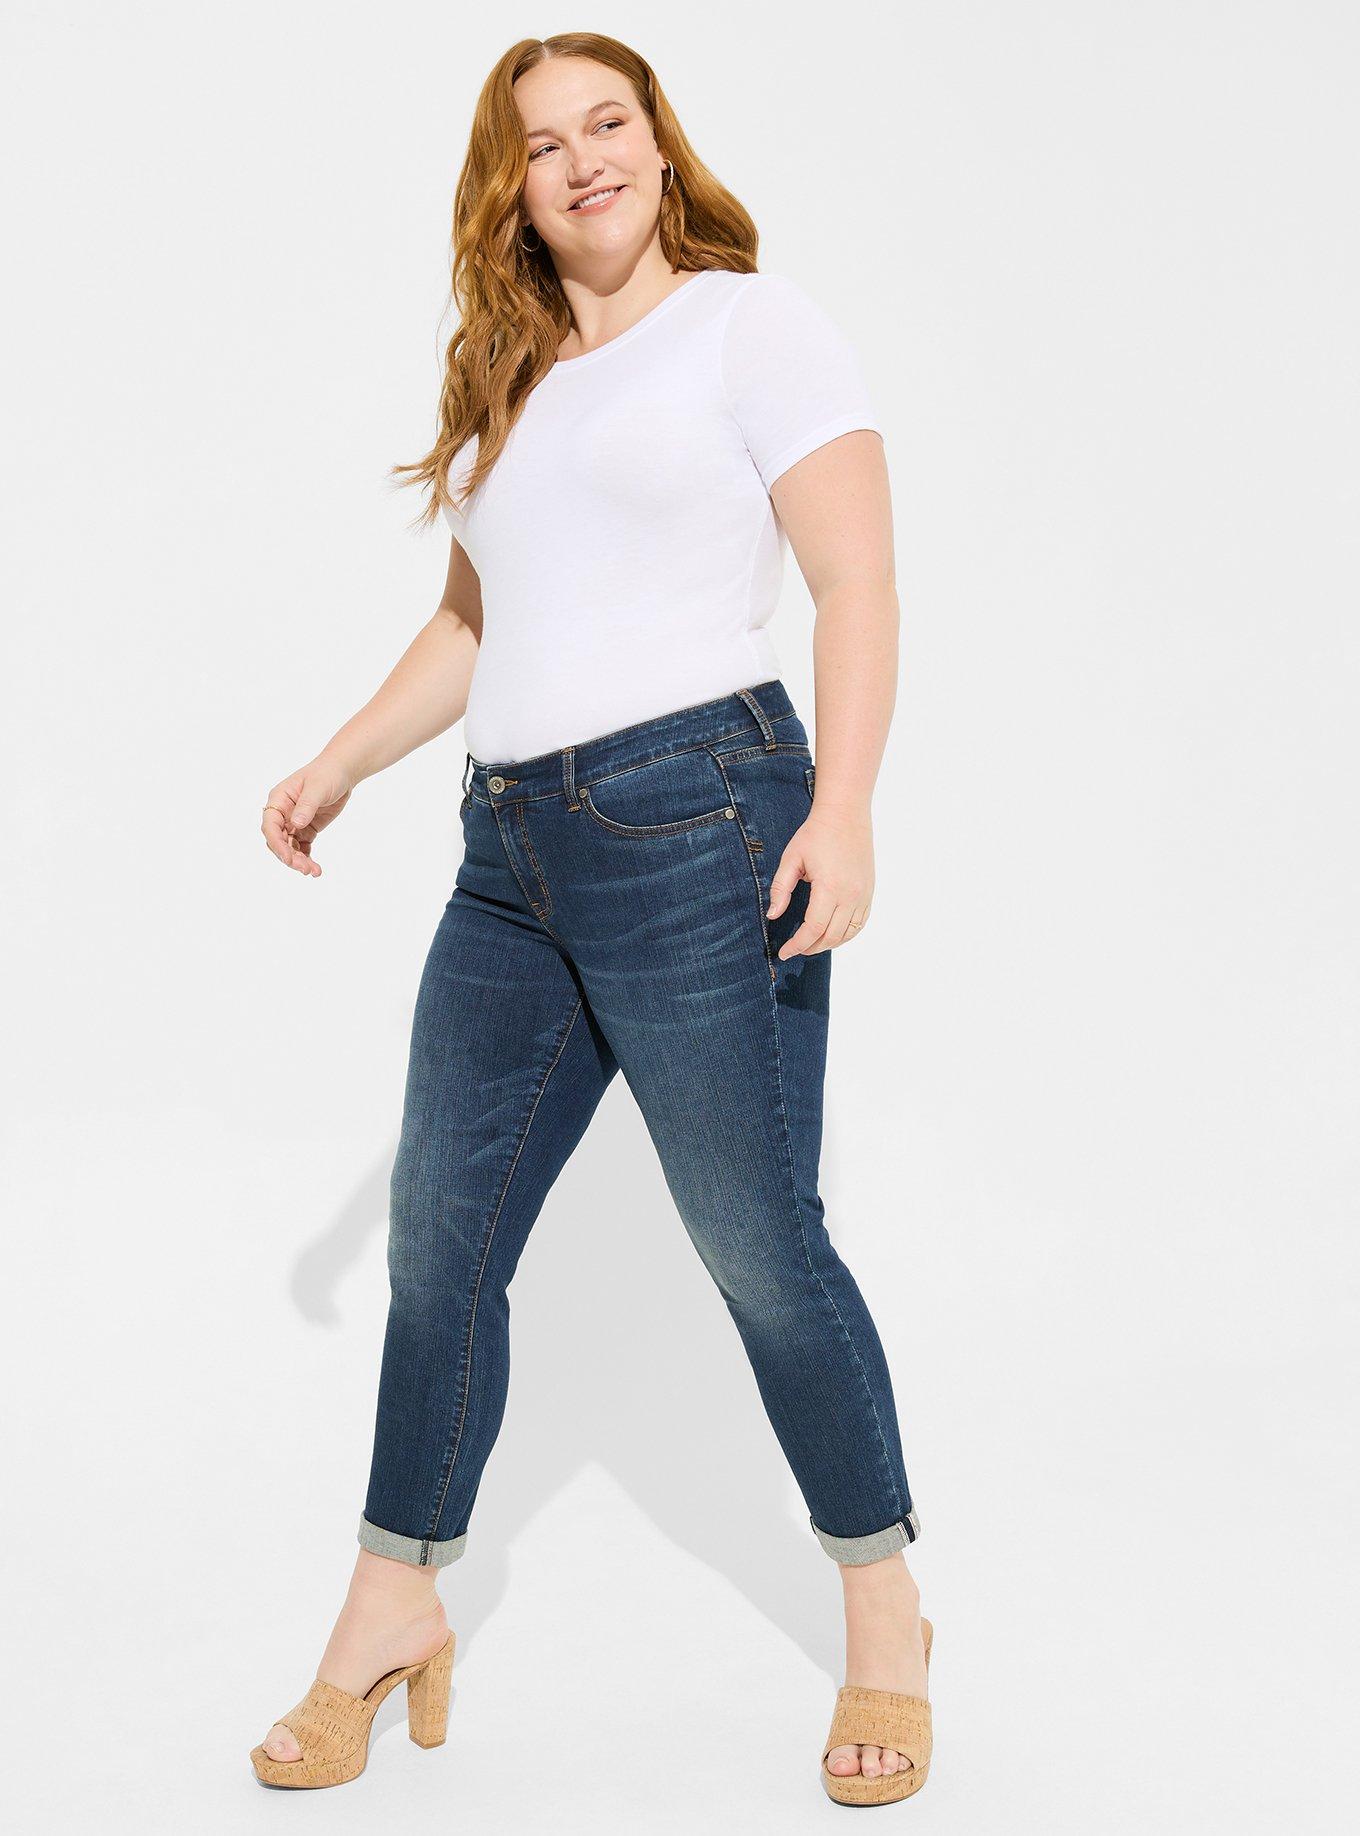 Baggy jeans for an 'almost' tall girl : r/TallGirls